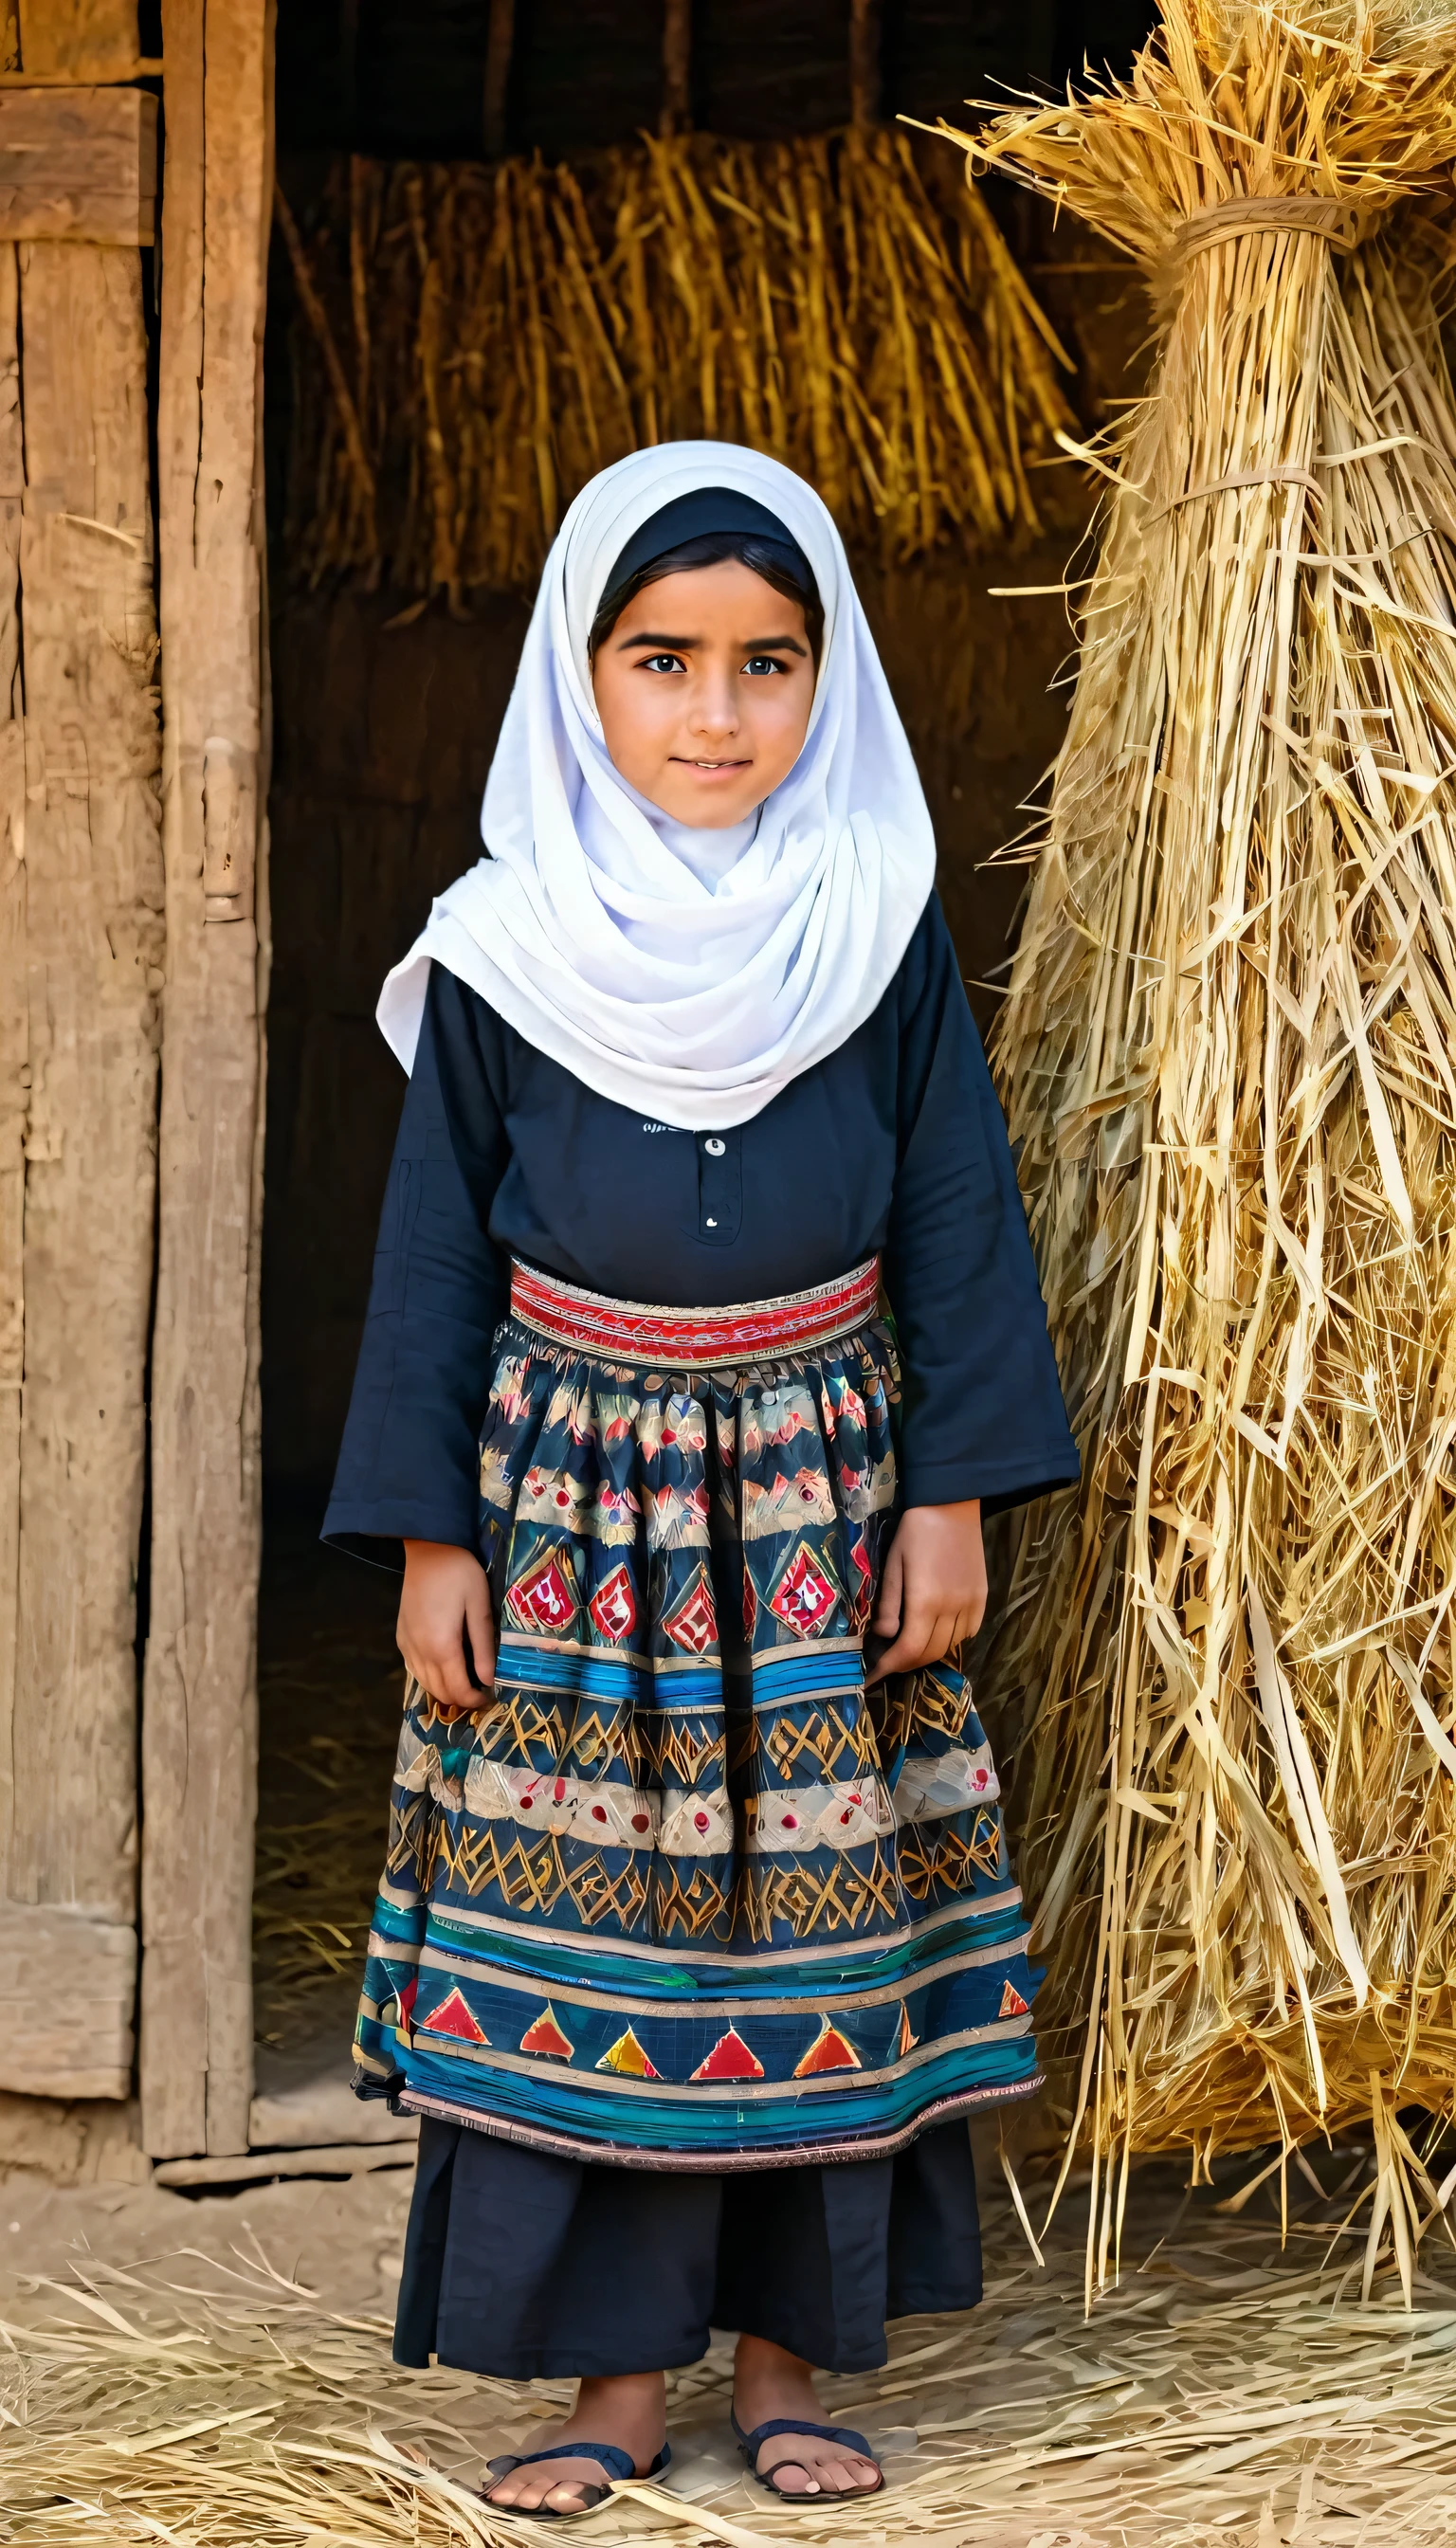 1girl, 10-years old, solo, an Iraqi  wearing traditional clothing at the theshold of a hut, wearing hijab, background includes hay and outdoor elements, black_hair, standing, looking_at_viewer